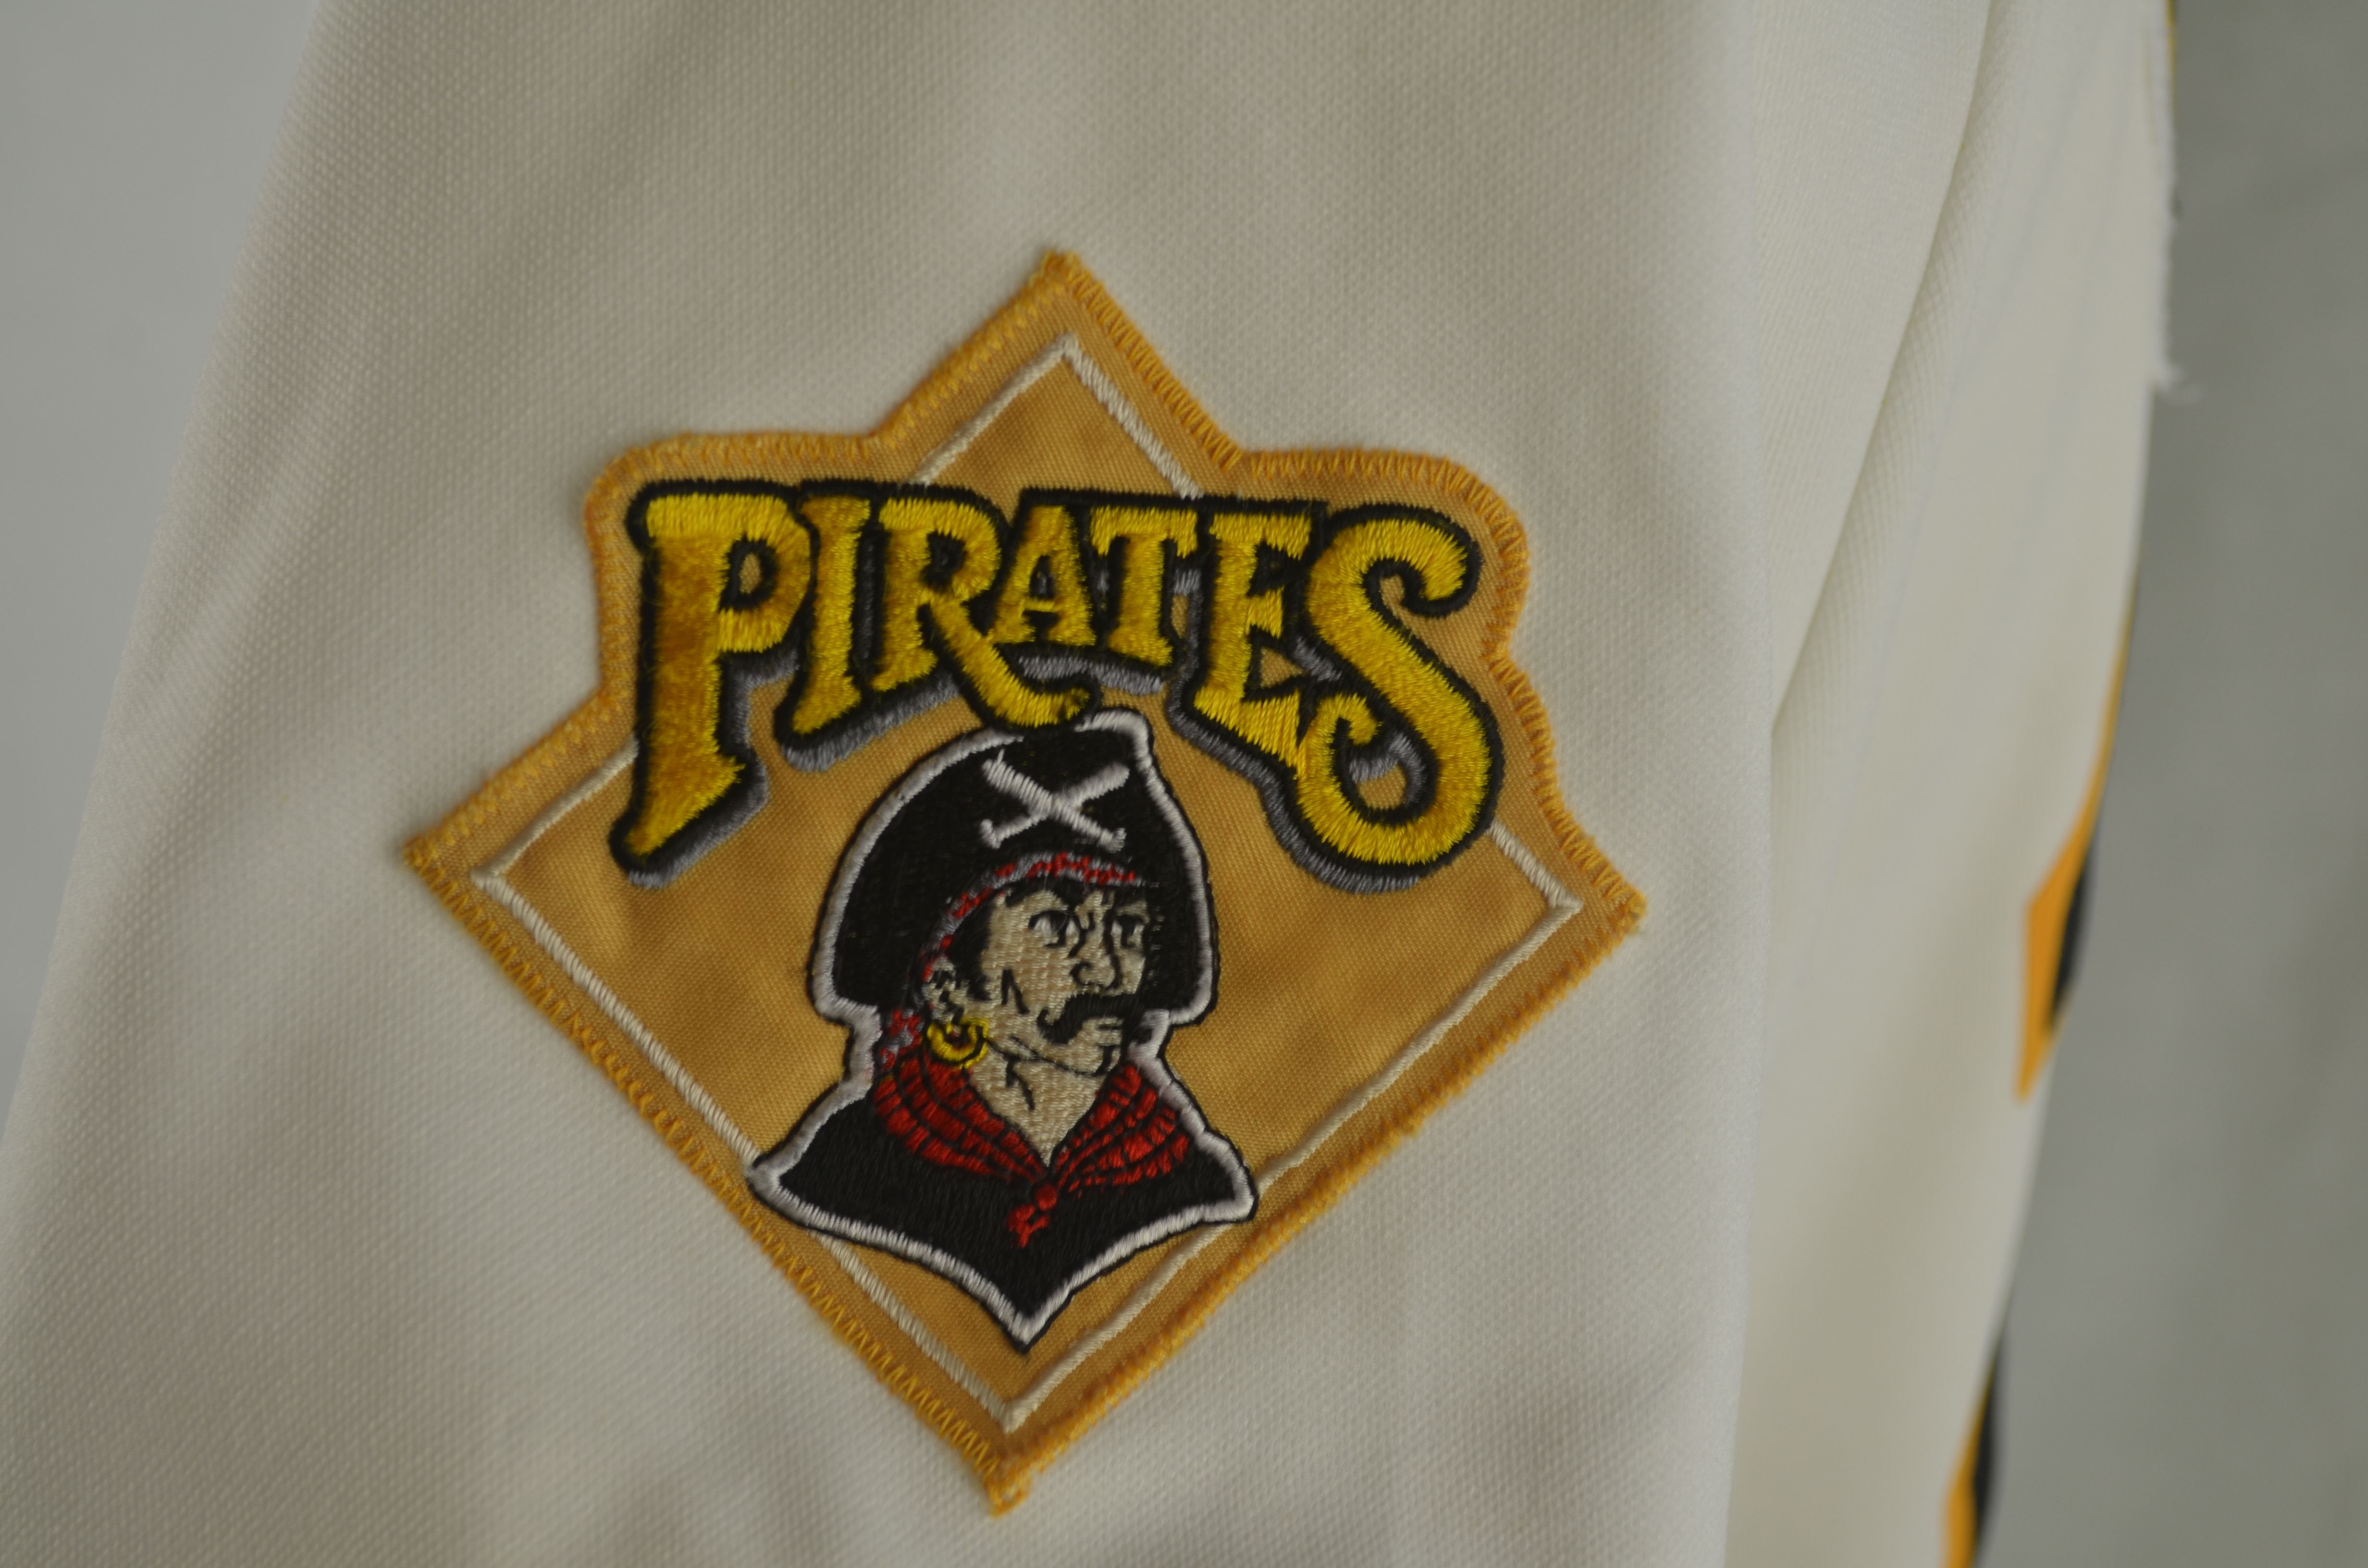 Lot Detail - 1992 Barry Bonds Pittsburgh Pirates Game-Used Jersey